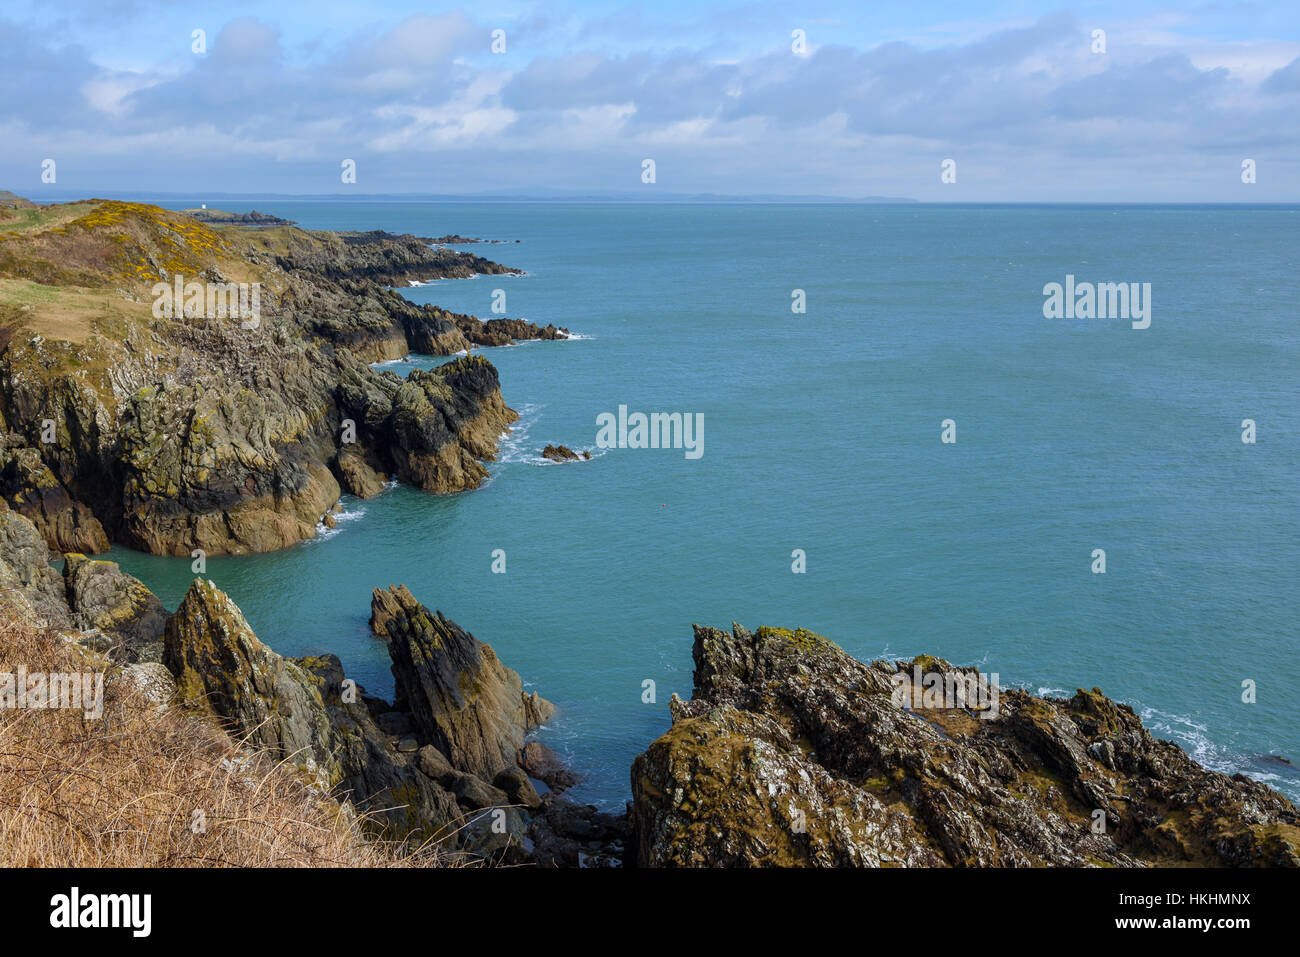 Cliffs along Solway coast near Isle of Whithorn, Wigtonshire, Dumfries & Galloway, Scotland Stock Photo